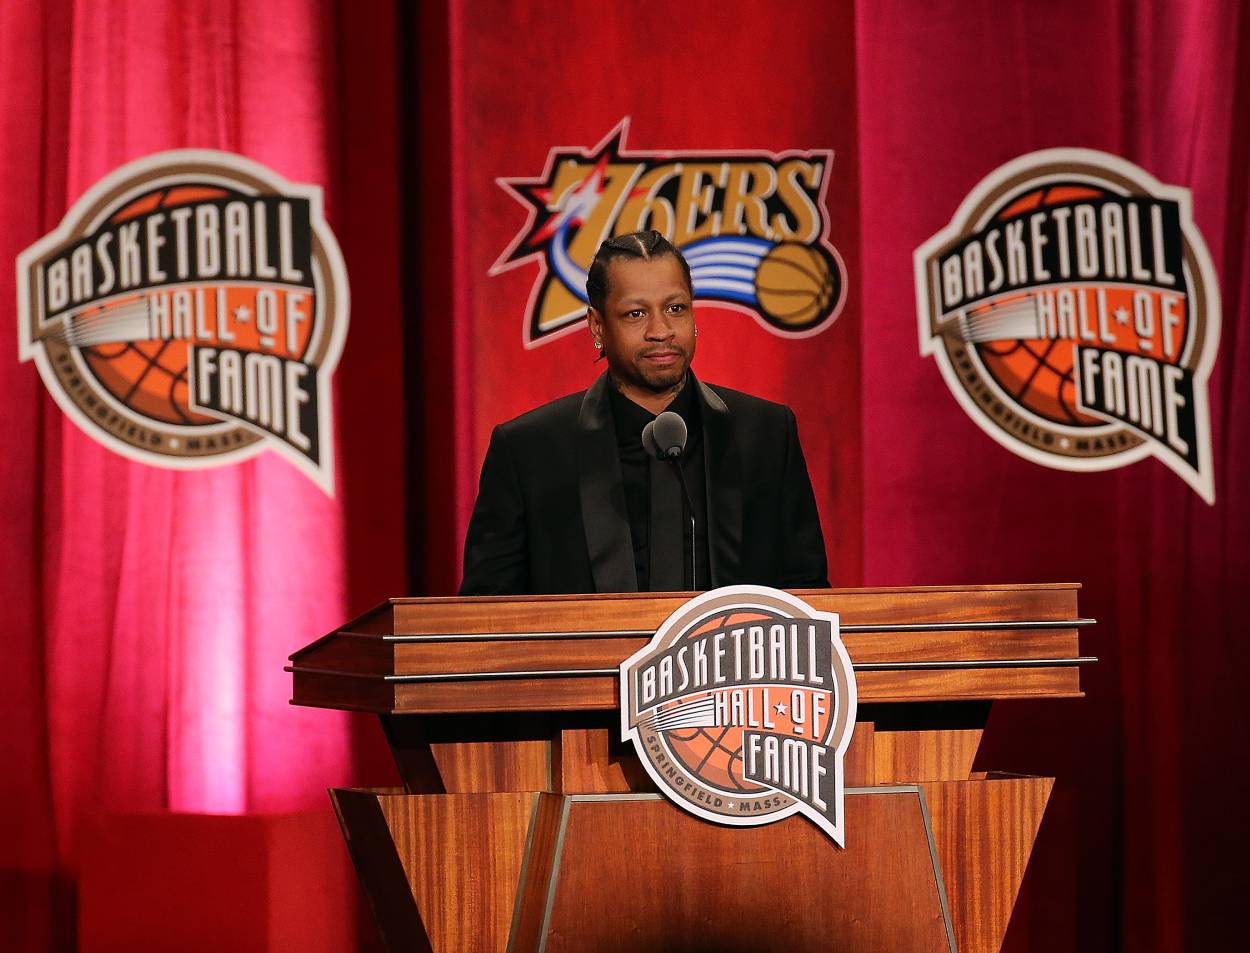 Allen Iverson paid homage to Michael Jordan during his Hall of Fame speech in 2016. |